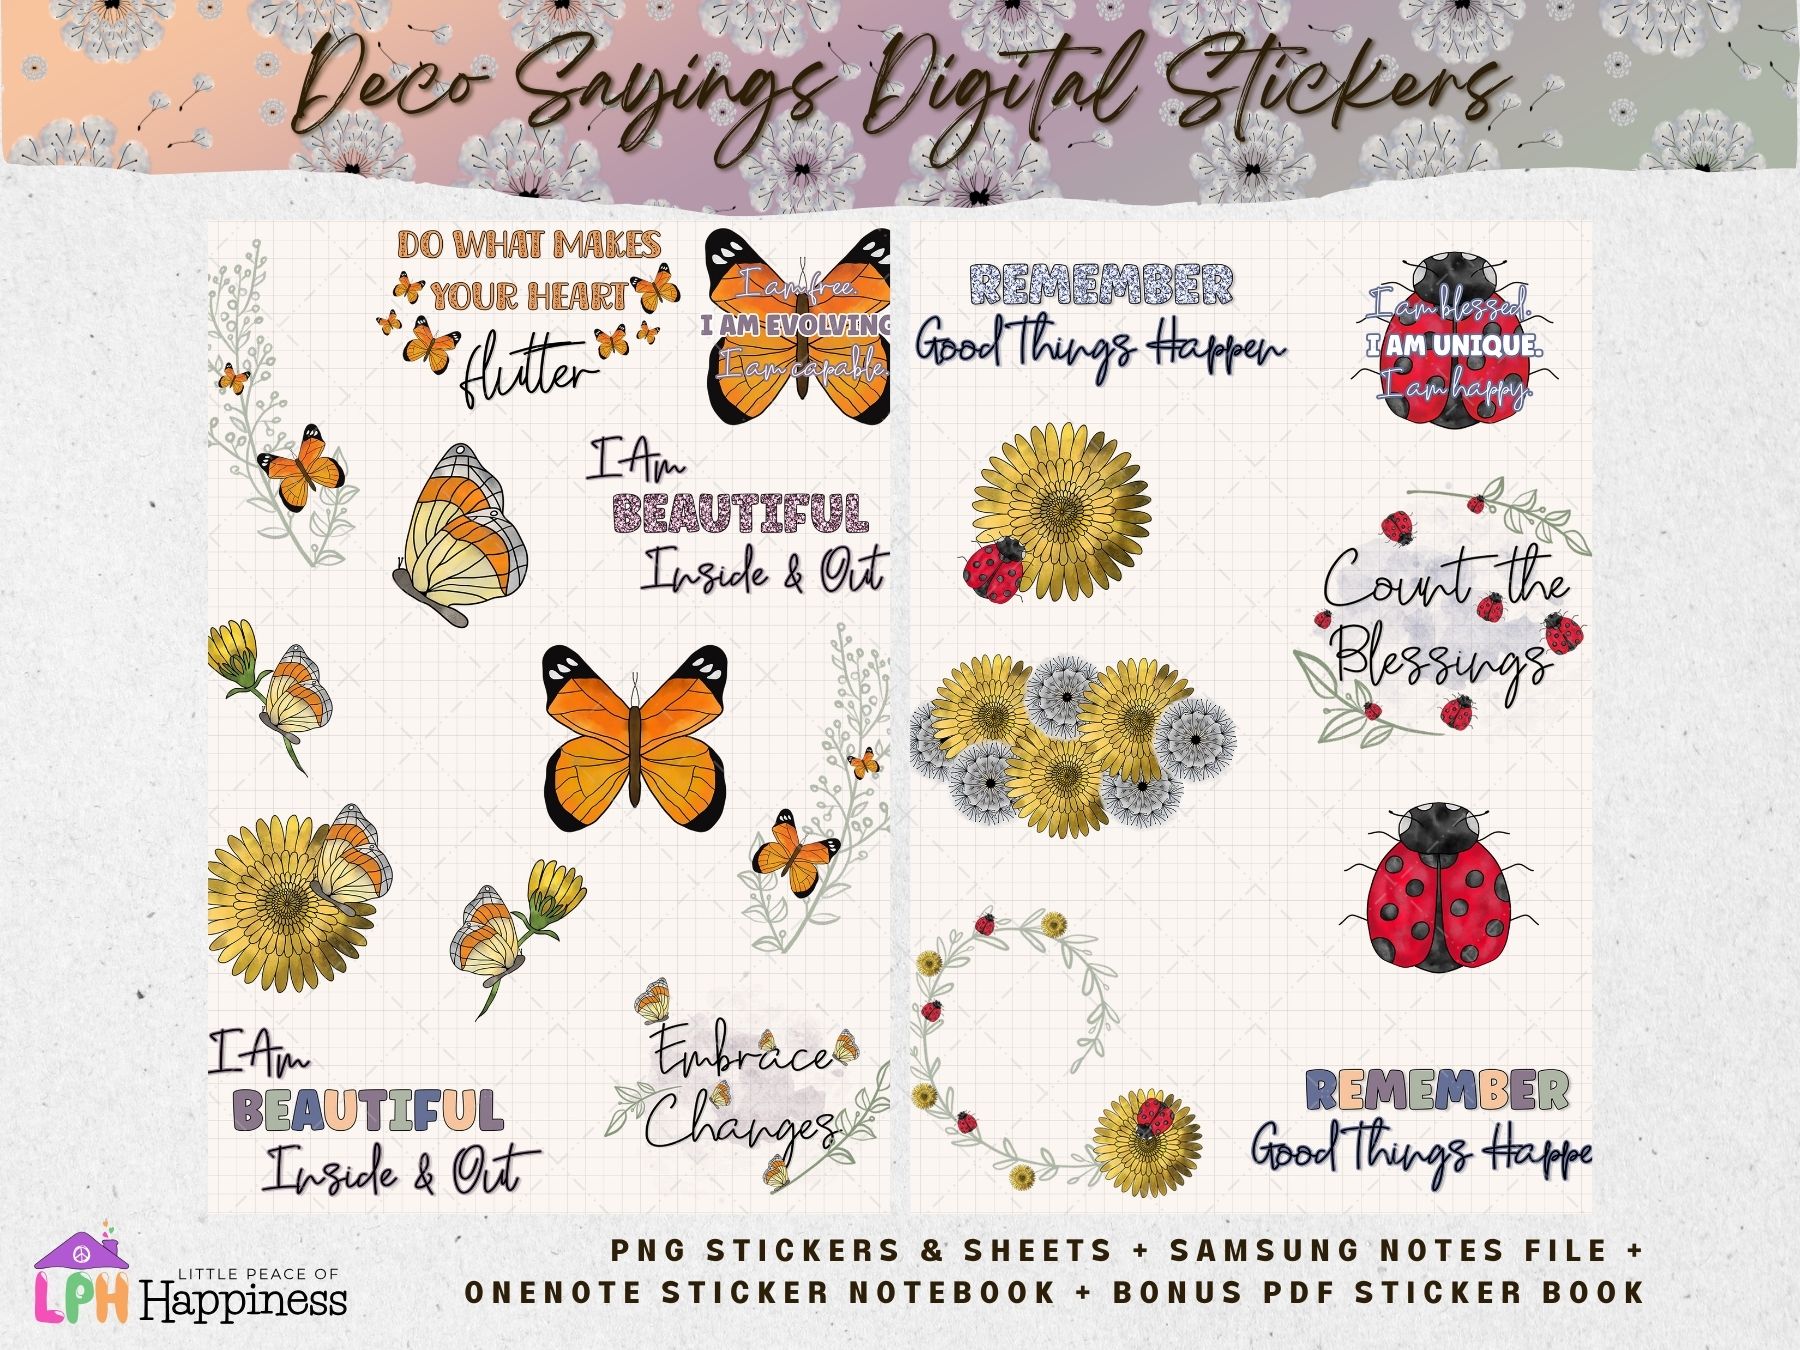 Cute Motivational Sayings Decorative Digital Sticker Inspired by Nature, Dandelion Flowers, Ladybugs, and Butterfly for Digital Planners Android, iPad, OneNote Planners